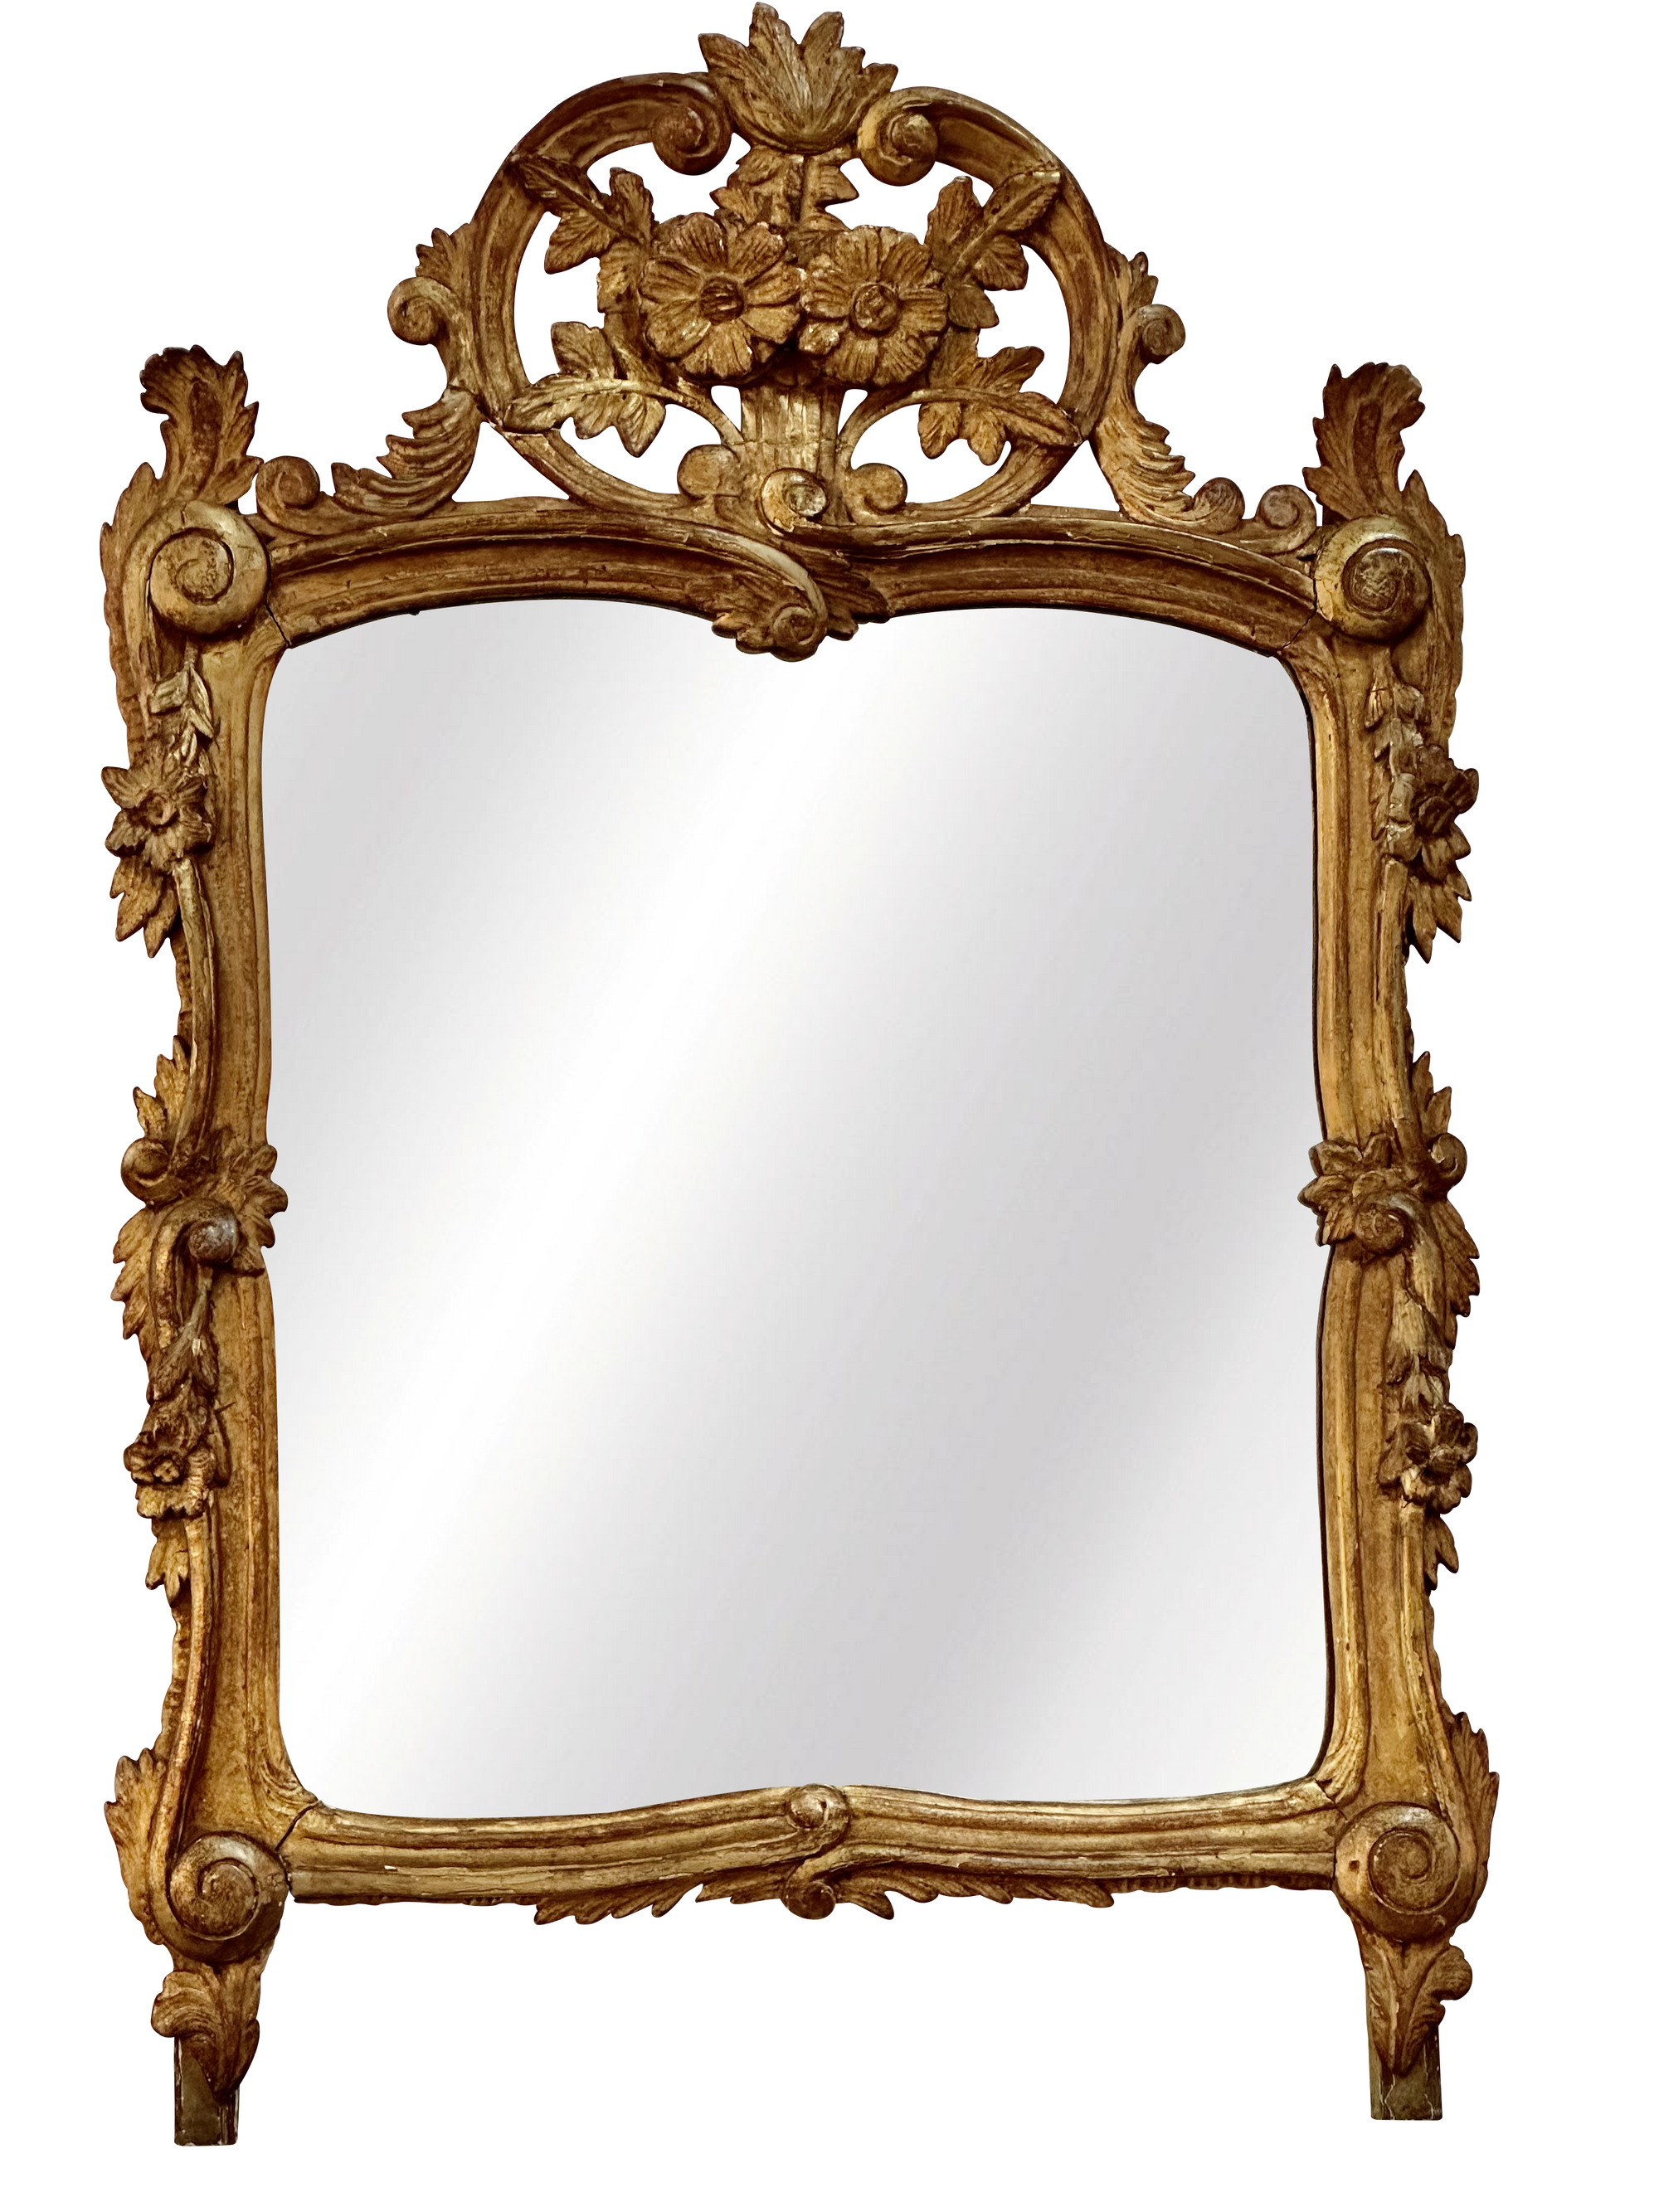 French Provincial Mirror with Floral and Foliate Carvings